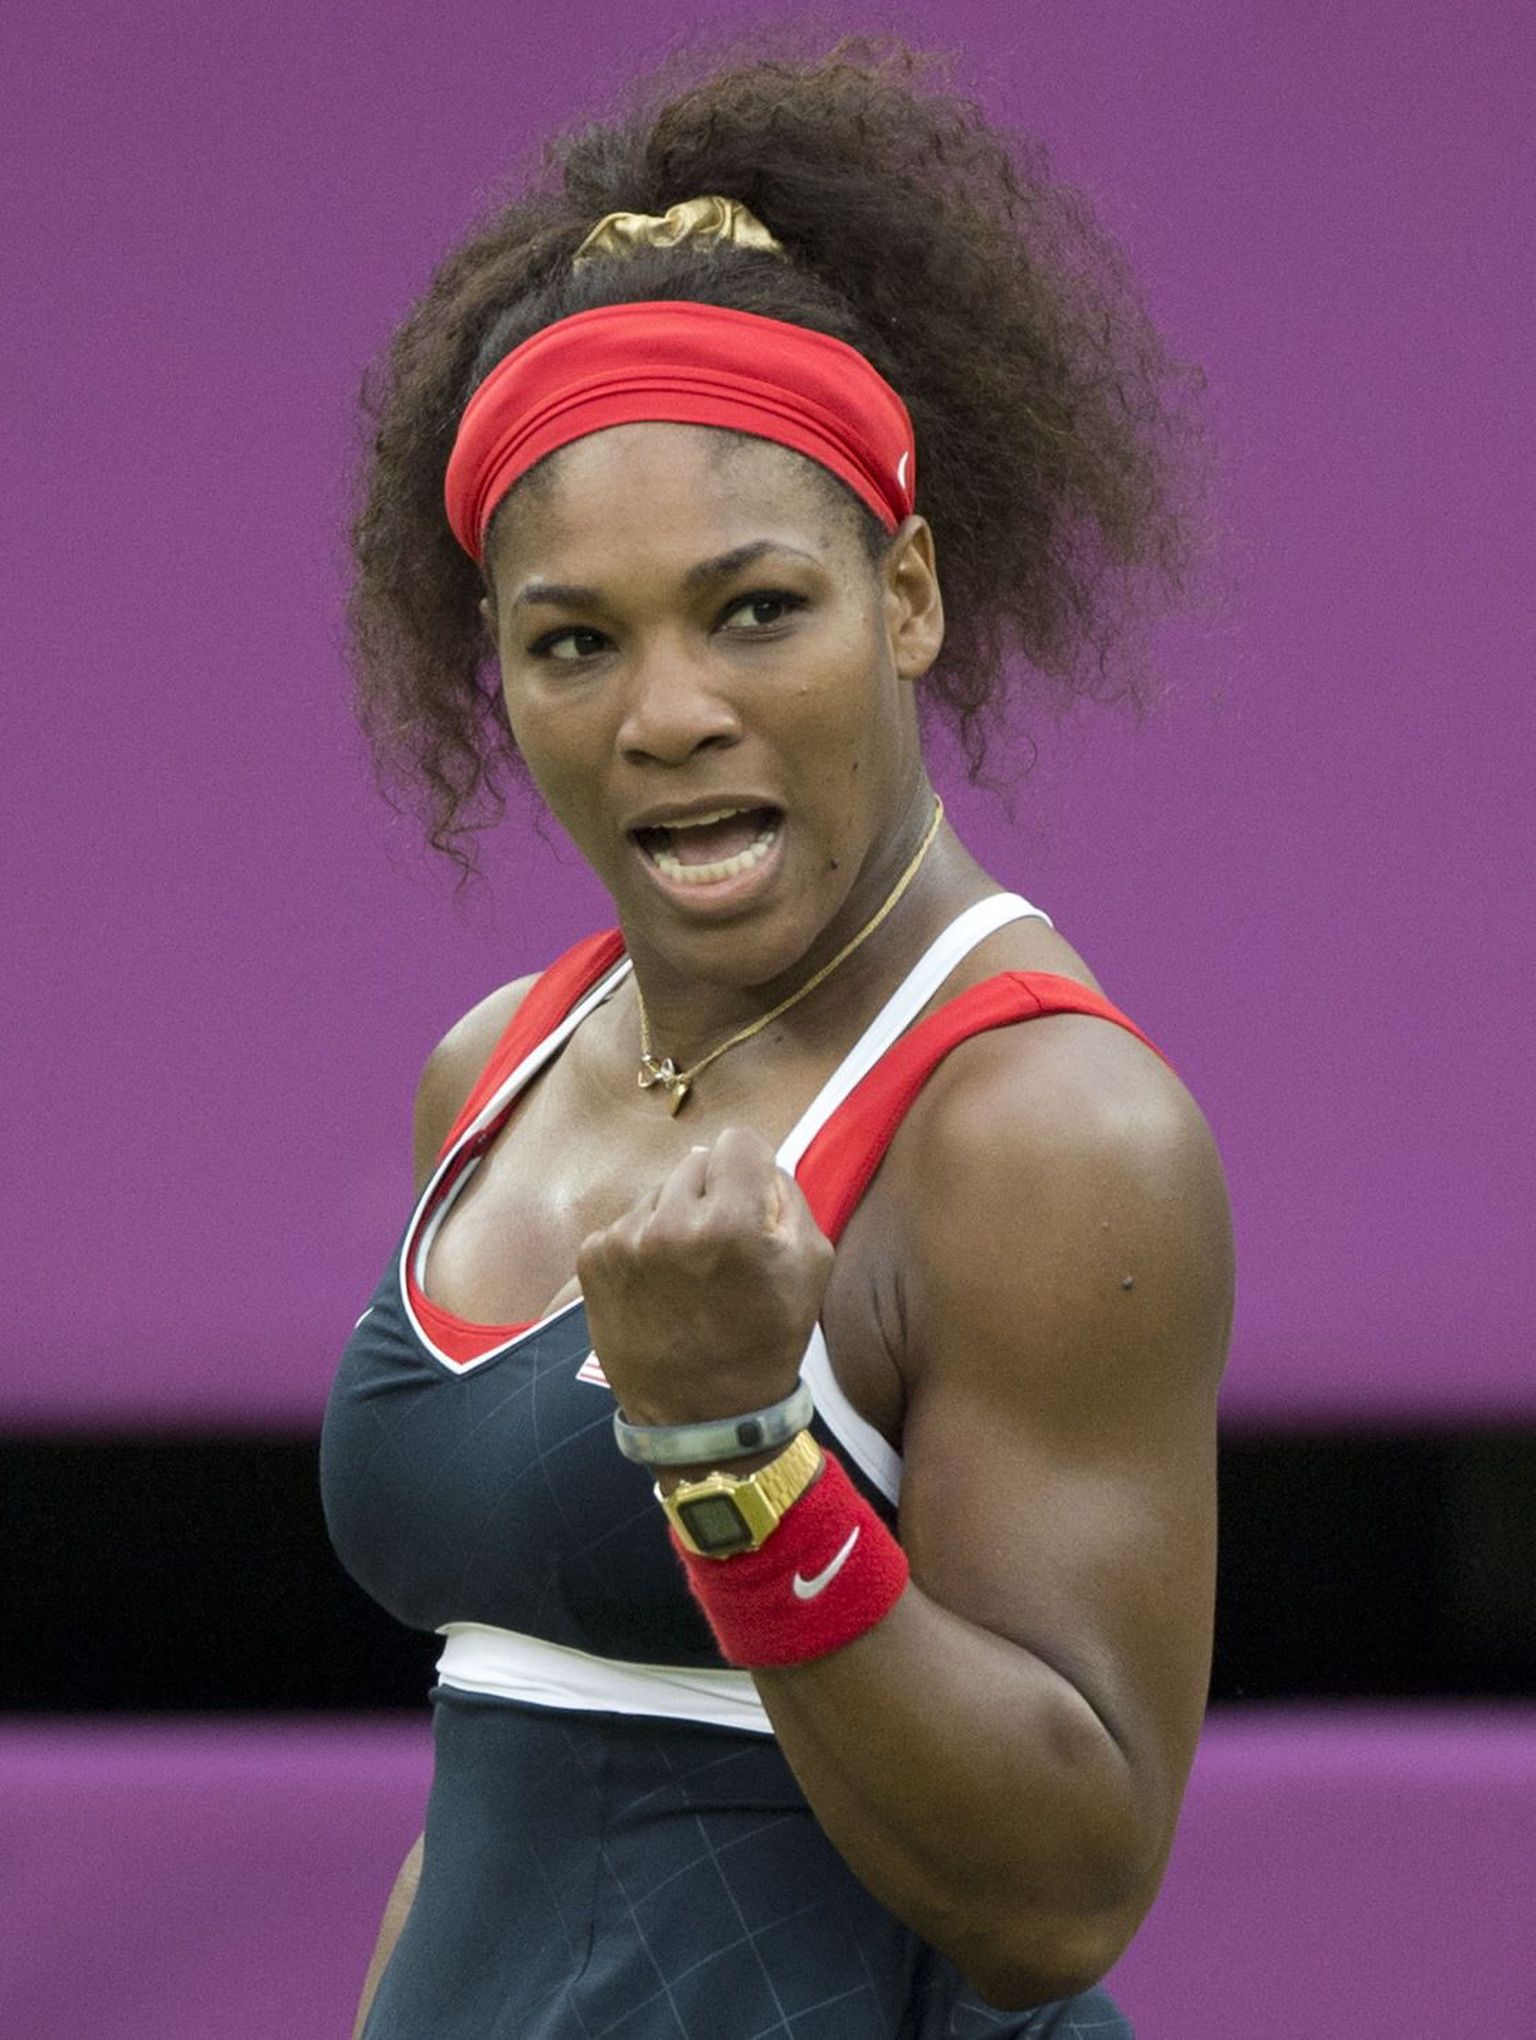 Serena Williams of the US reacts after a shot to Russia's Vera Zvonareva during their women's singles tennis match at the 2012 London Olympic Games at the All England Tennis Club in Wimbledon, southwest London, on August 1, 2012. AFP PHOTO / JOHN MACDOUGALL